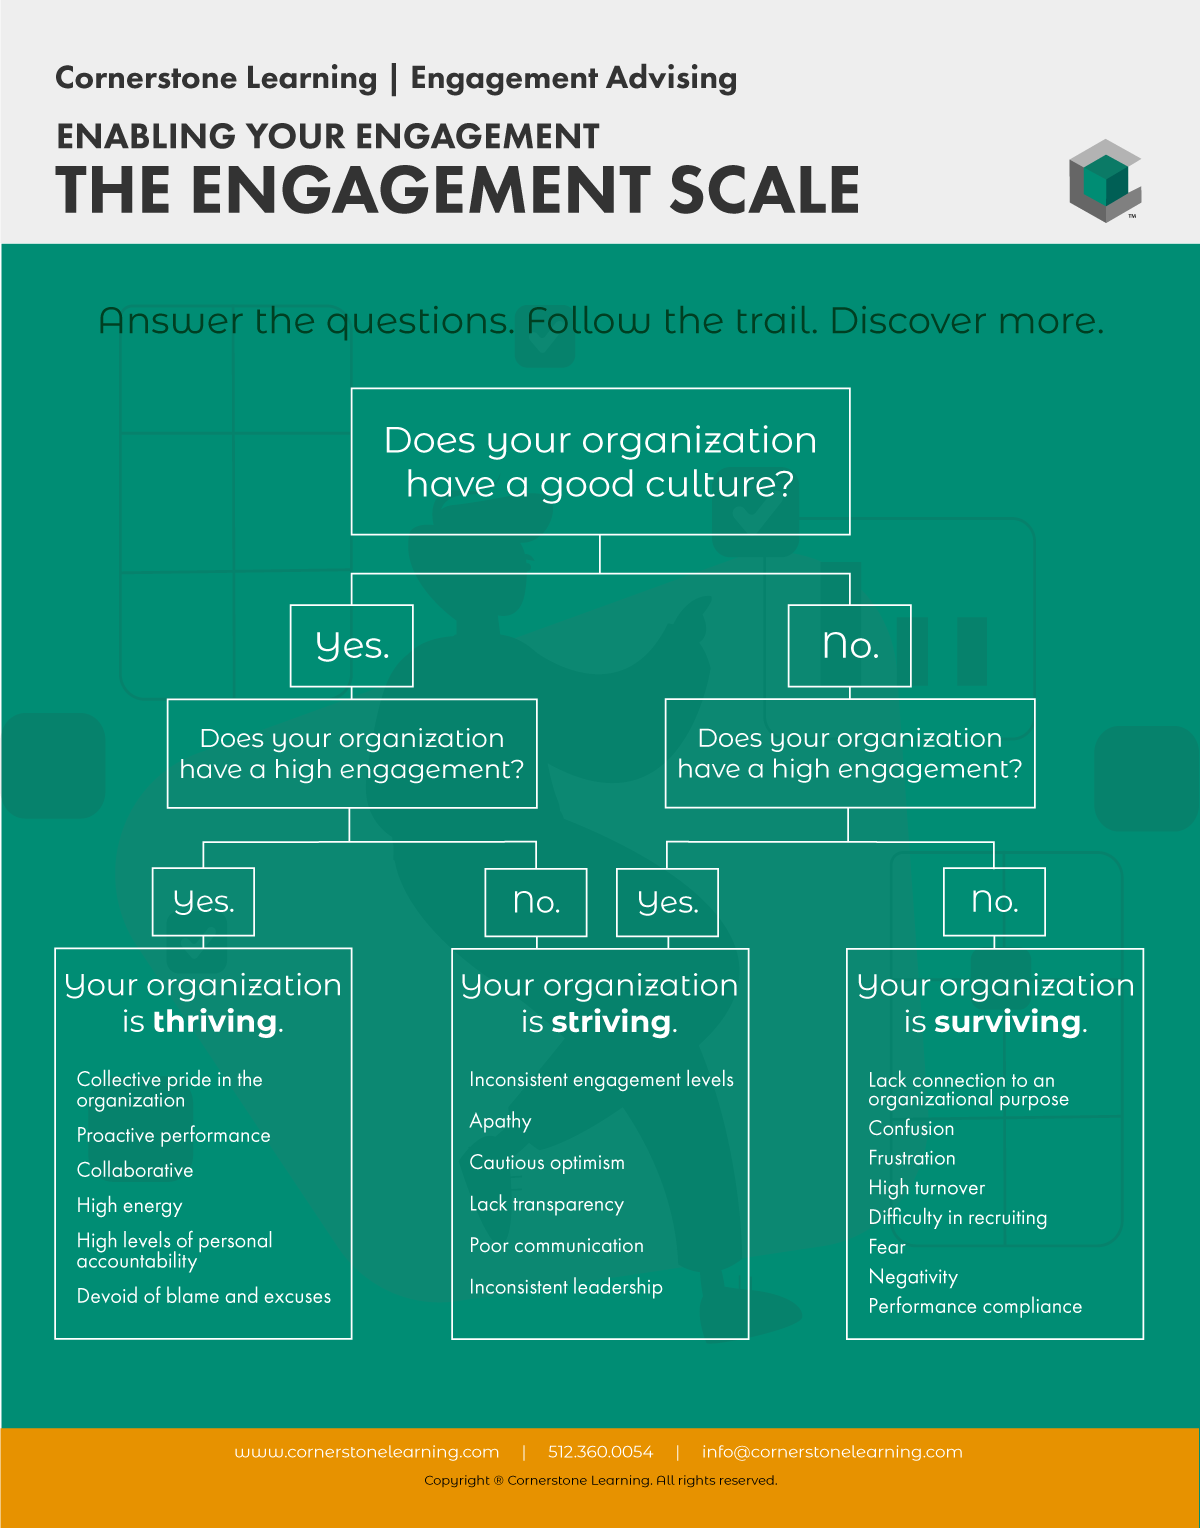 New! The Engagement Scale